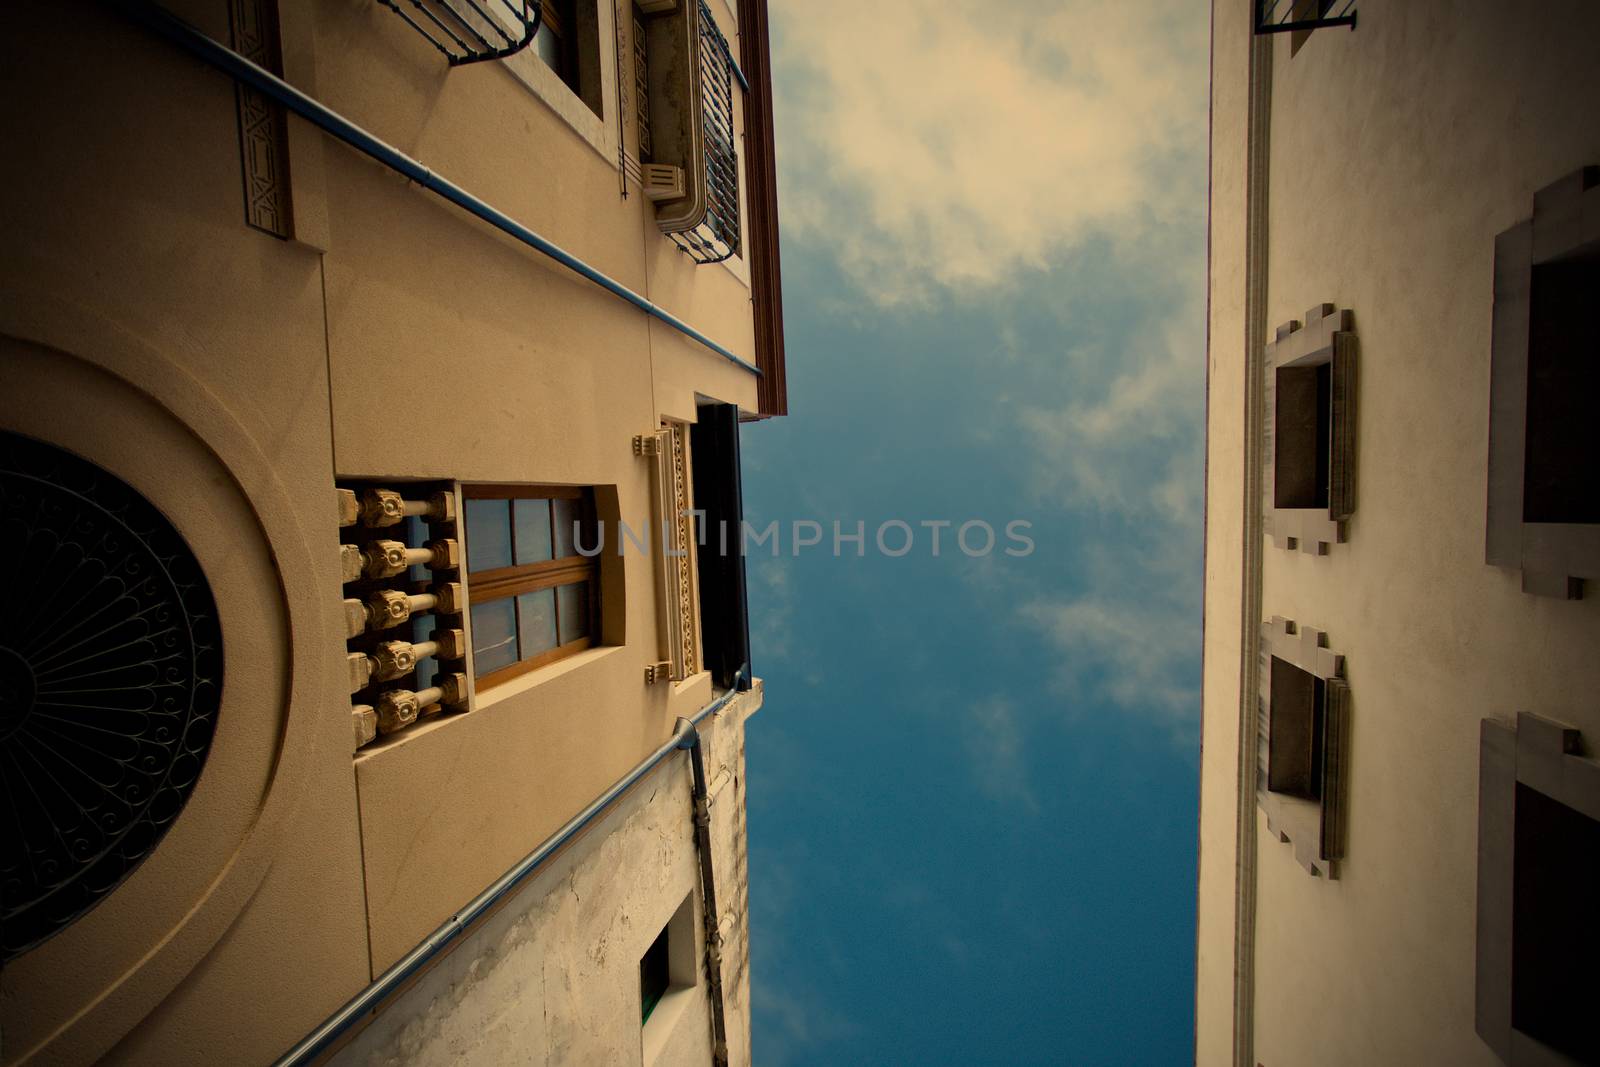 european sky above houses, instagram image style